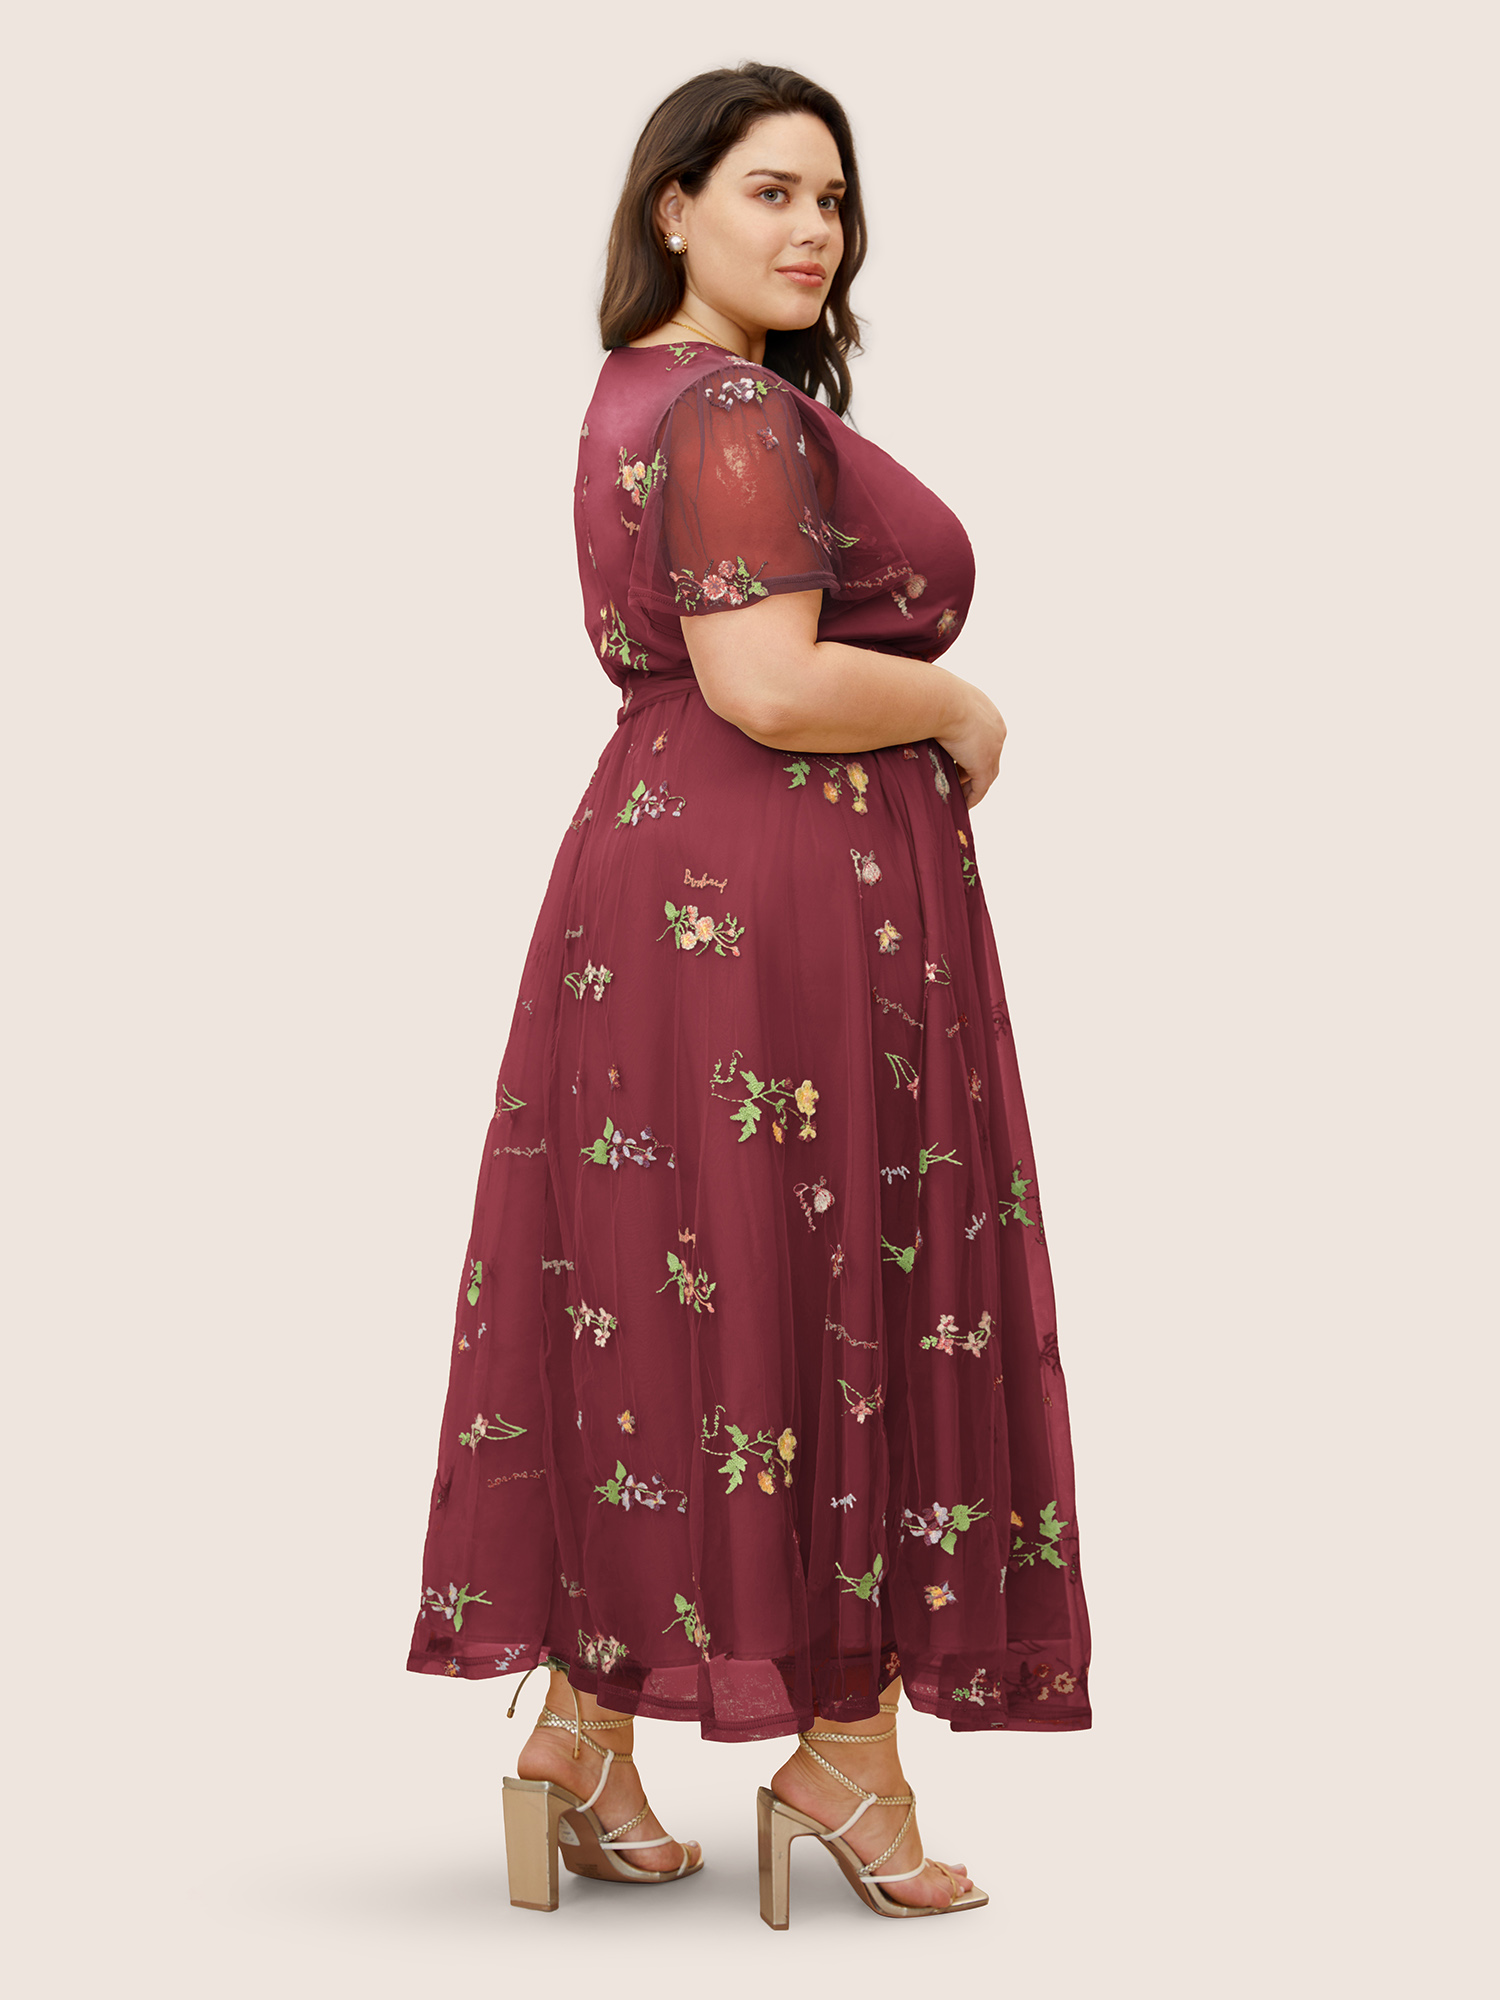 

Plus Size Overlap Collar Mesh Floral Embroidered Dress Burgundy Women Overlapping V-neck Short sleeve Curvy BloomChic